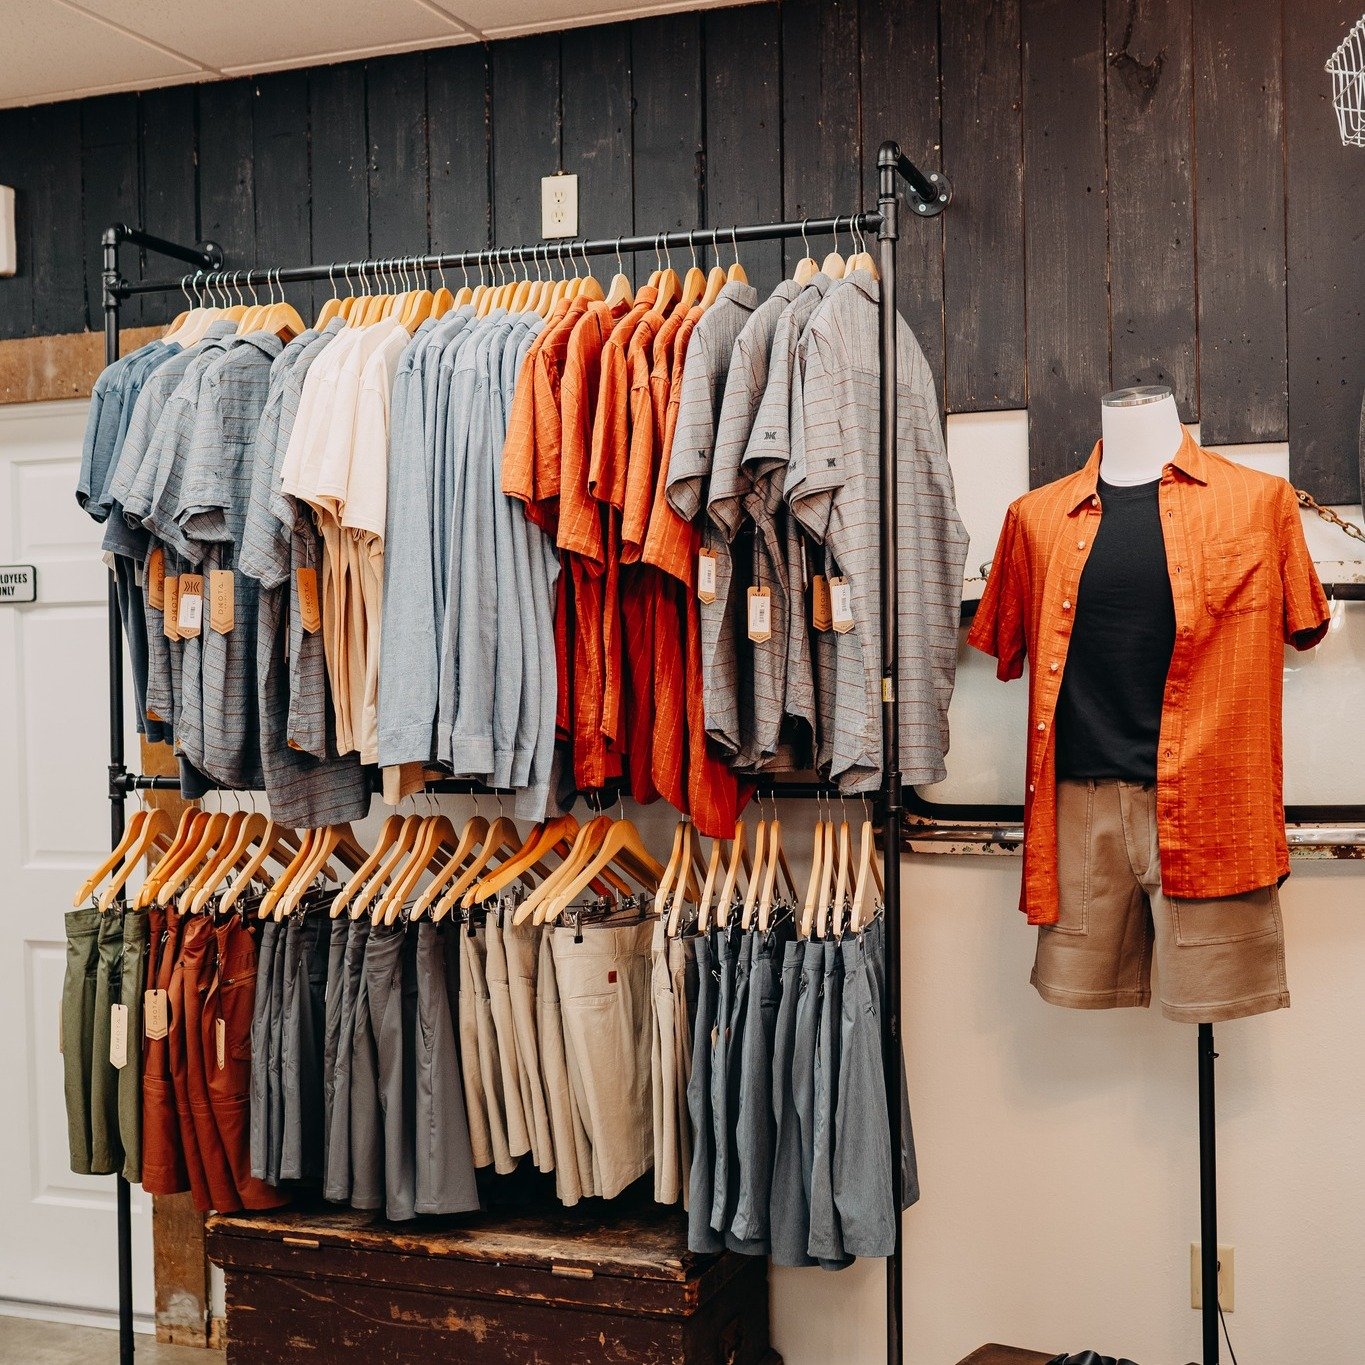 Tees, Button-Downs, Shorts, and more-just in time for Summer! ☀️ Stock up on high-quality favorites and even brands that you can't get anywhere else in Eau Claire!

#eauclaire #johnscottmensapparel #mensapparel #downtoearthshops #eauclaireshopping #m